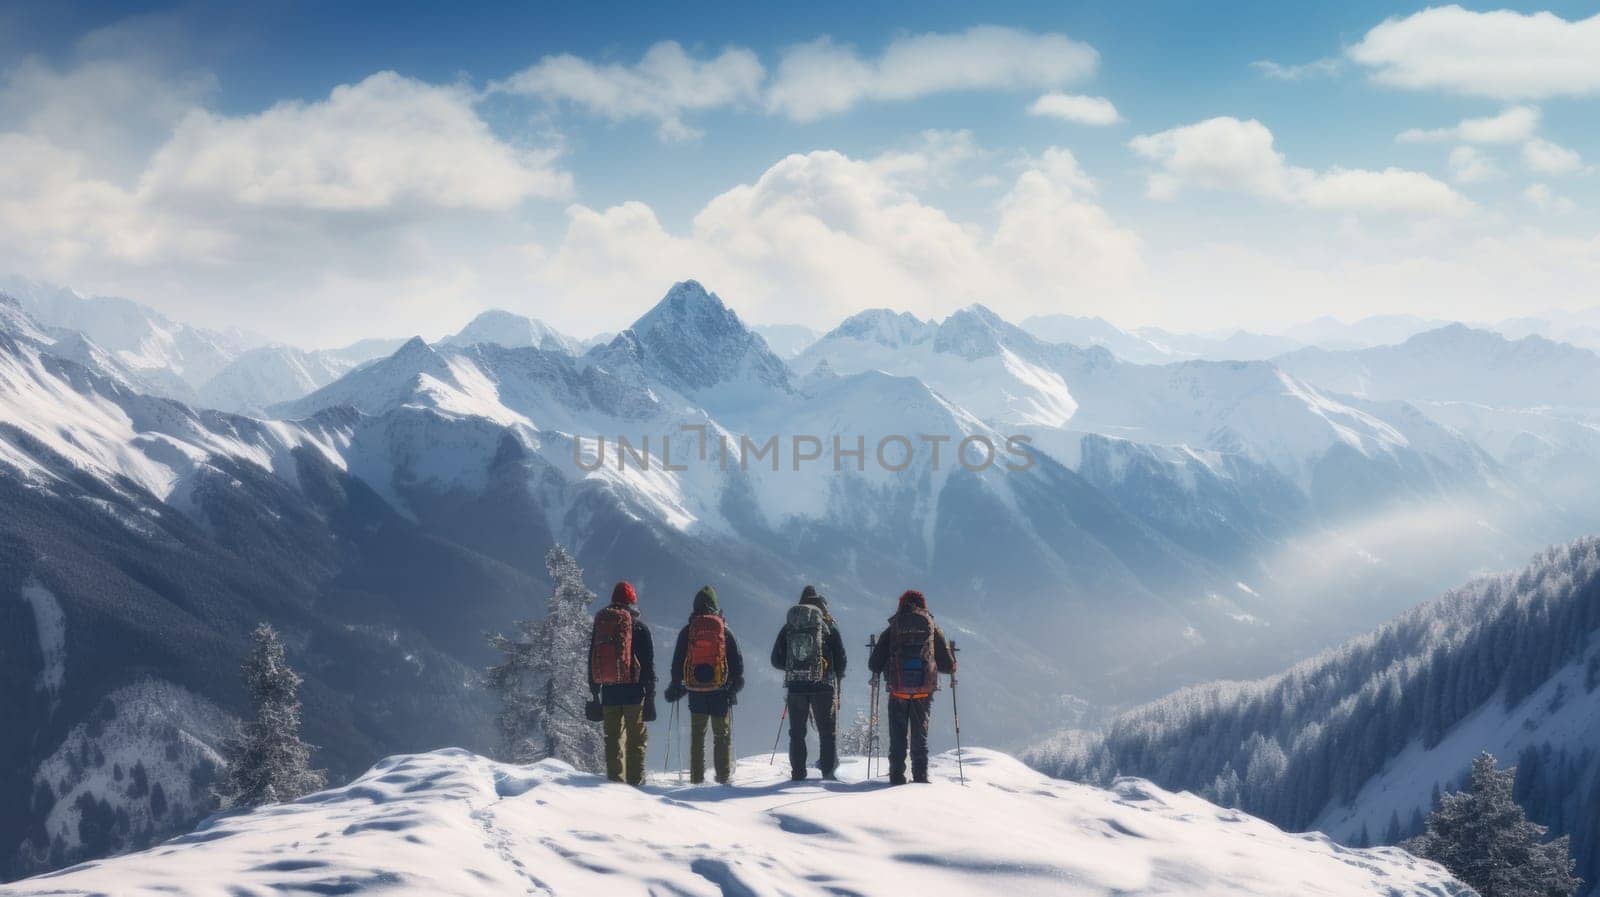 A family of skiers looks at the snow-capped mountains at a ski resort, during vacation and winter holidays. by Alla_Yurtayeva